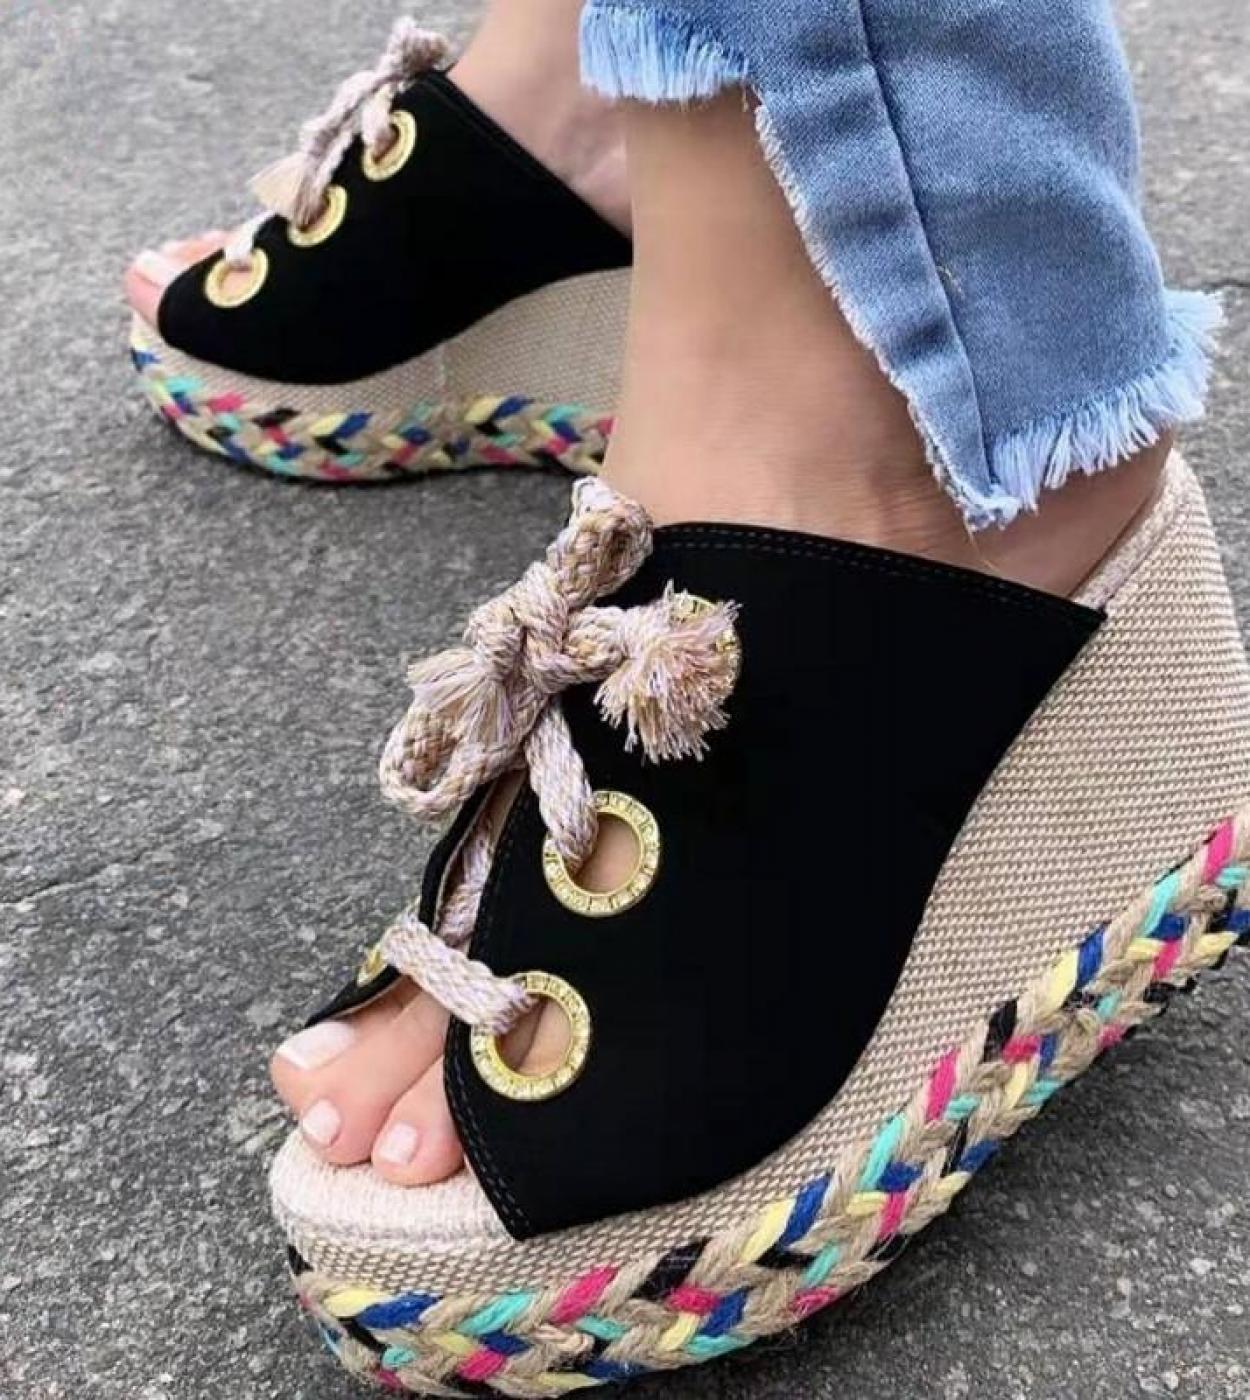 Ladies Slippers Summer 2022 Platform Wedge Mid Heels Lace Up Open Toe Fashion Slippers Beach Outdoor Ladies Shoes Zapato